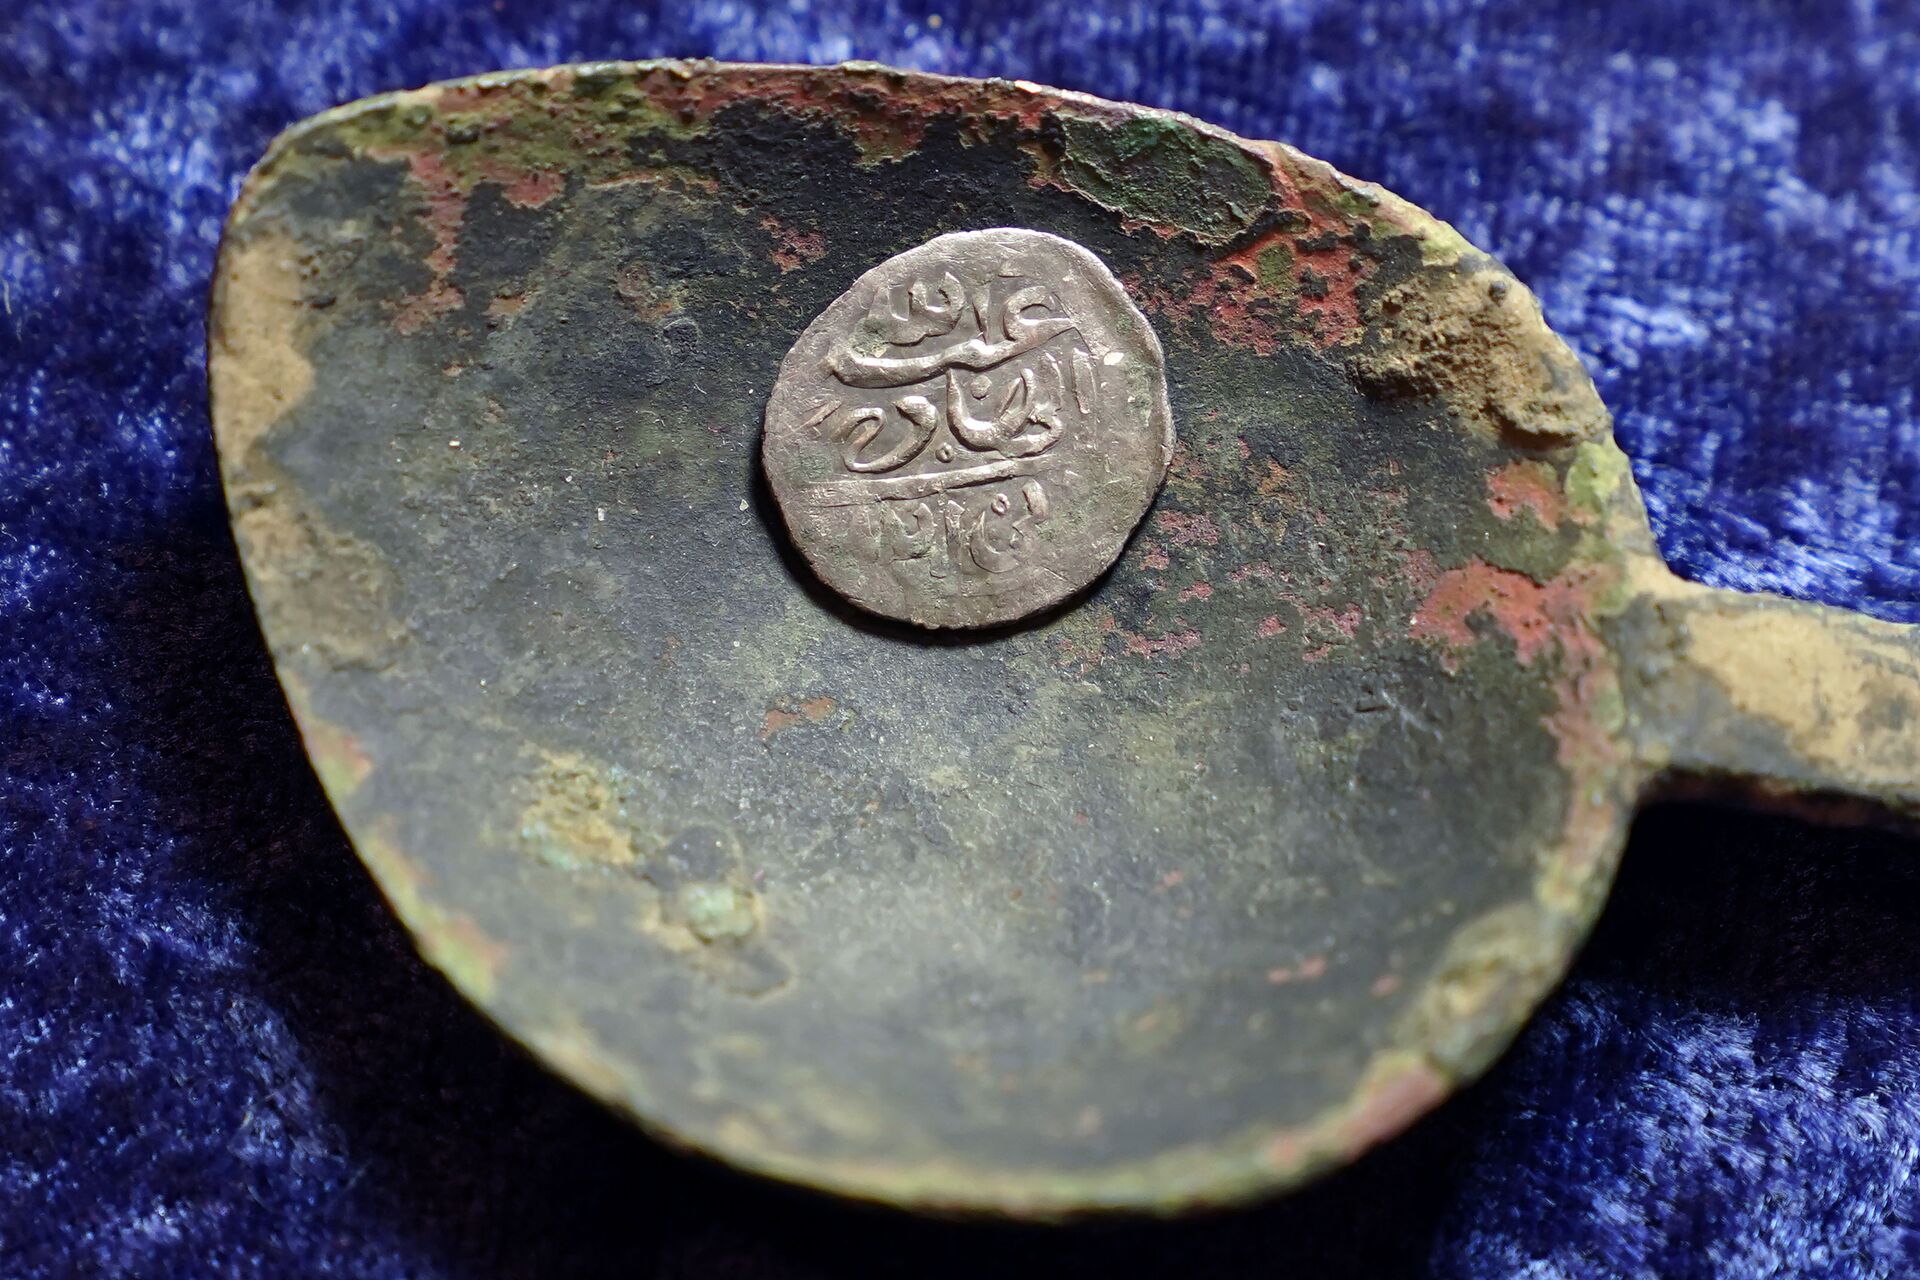 Discovery of 17th Century Arabian Coins in US Could Help Find Traces of Notorious Pirate - Report - Sputnik International, 1920, 03.04.2021